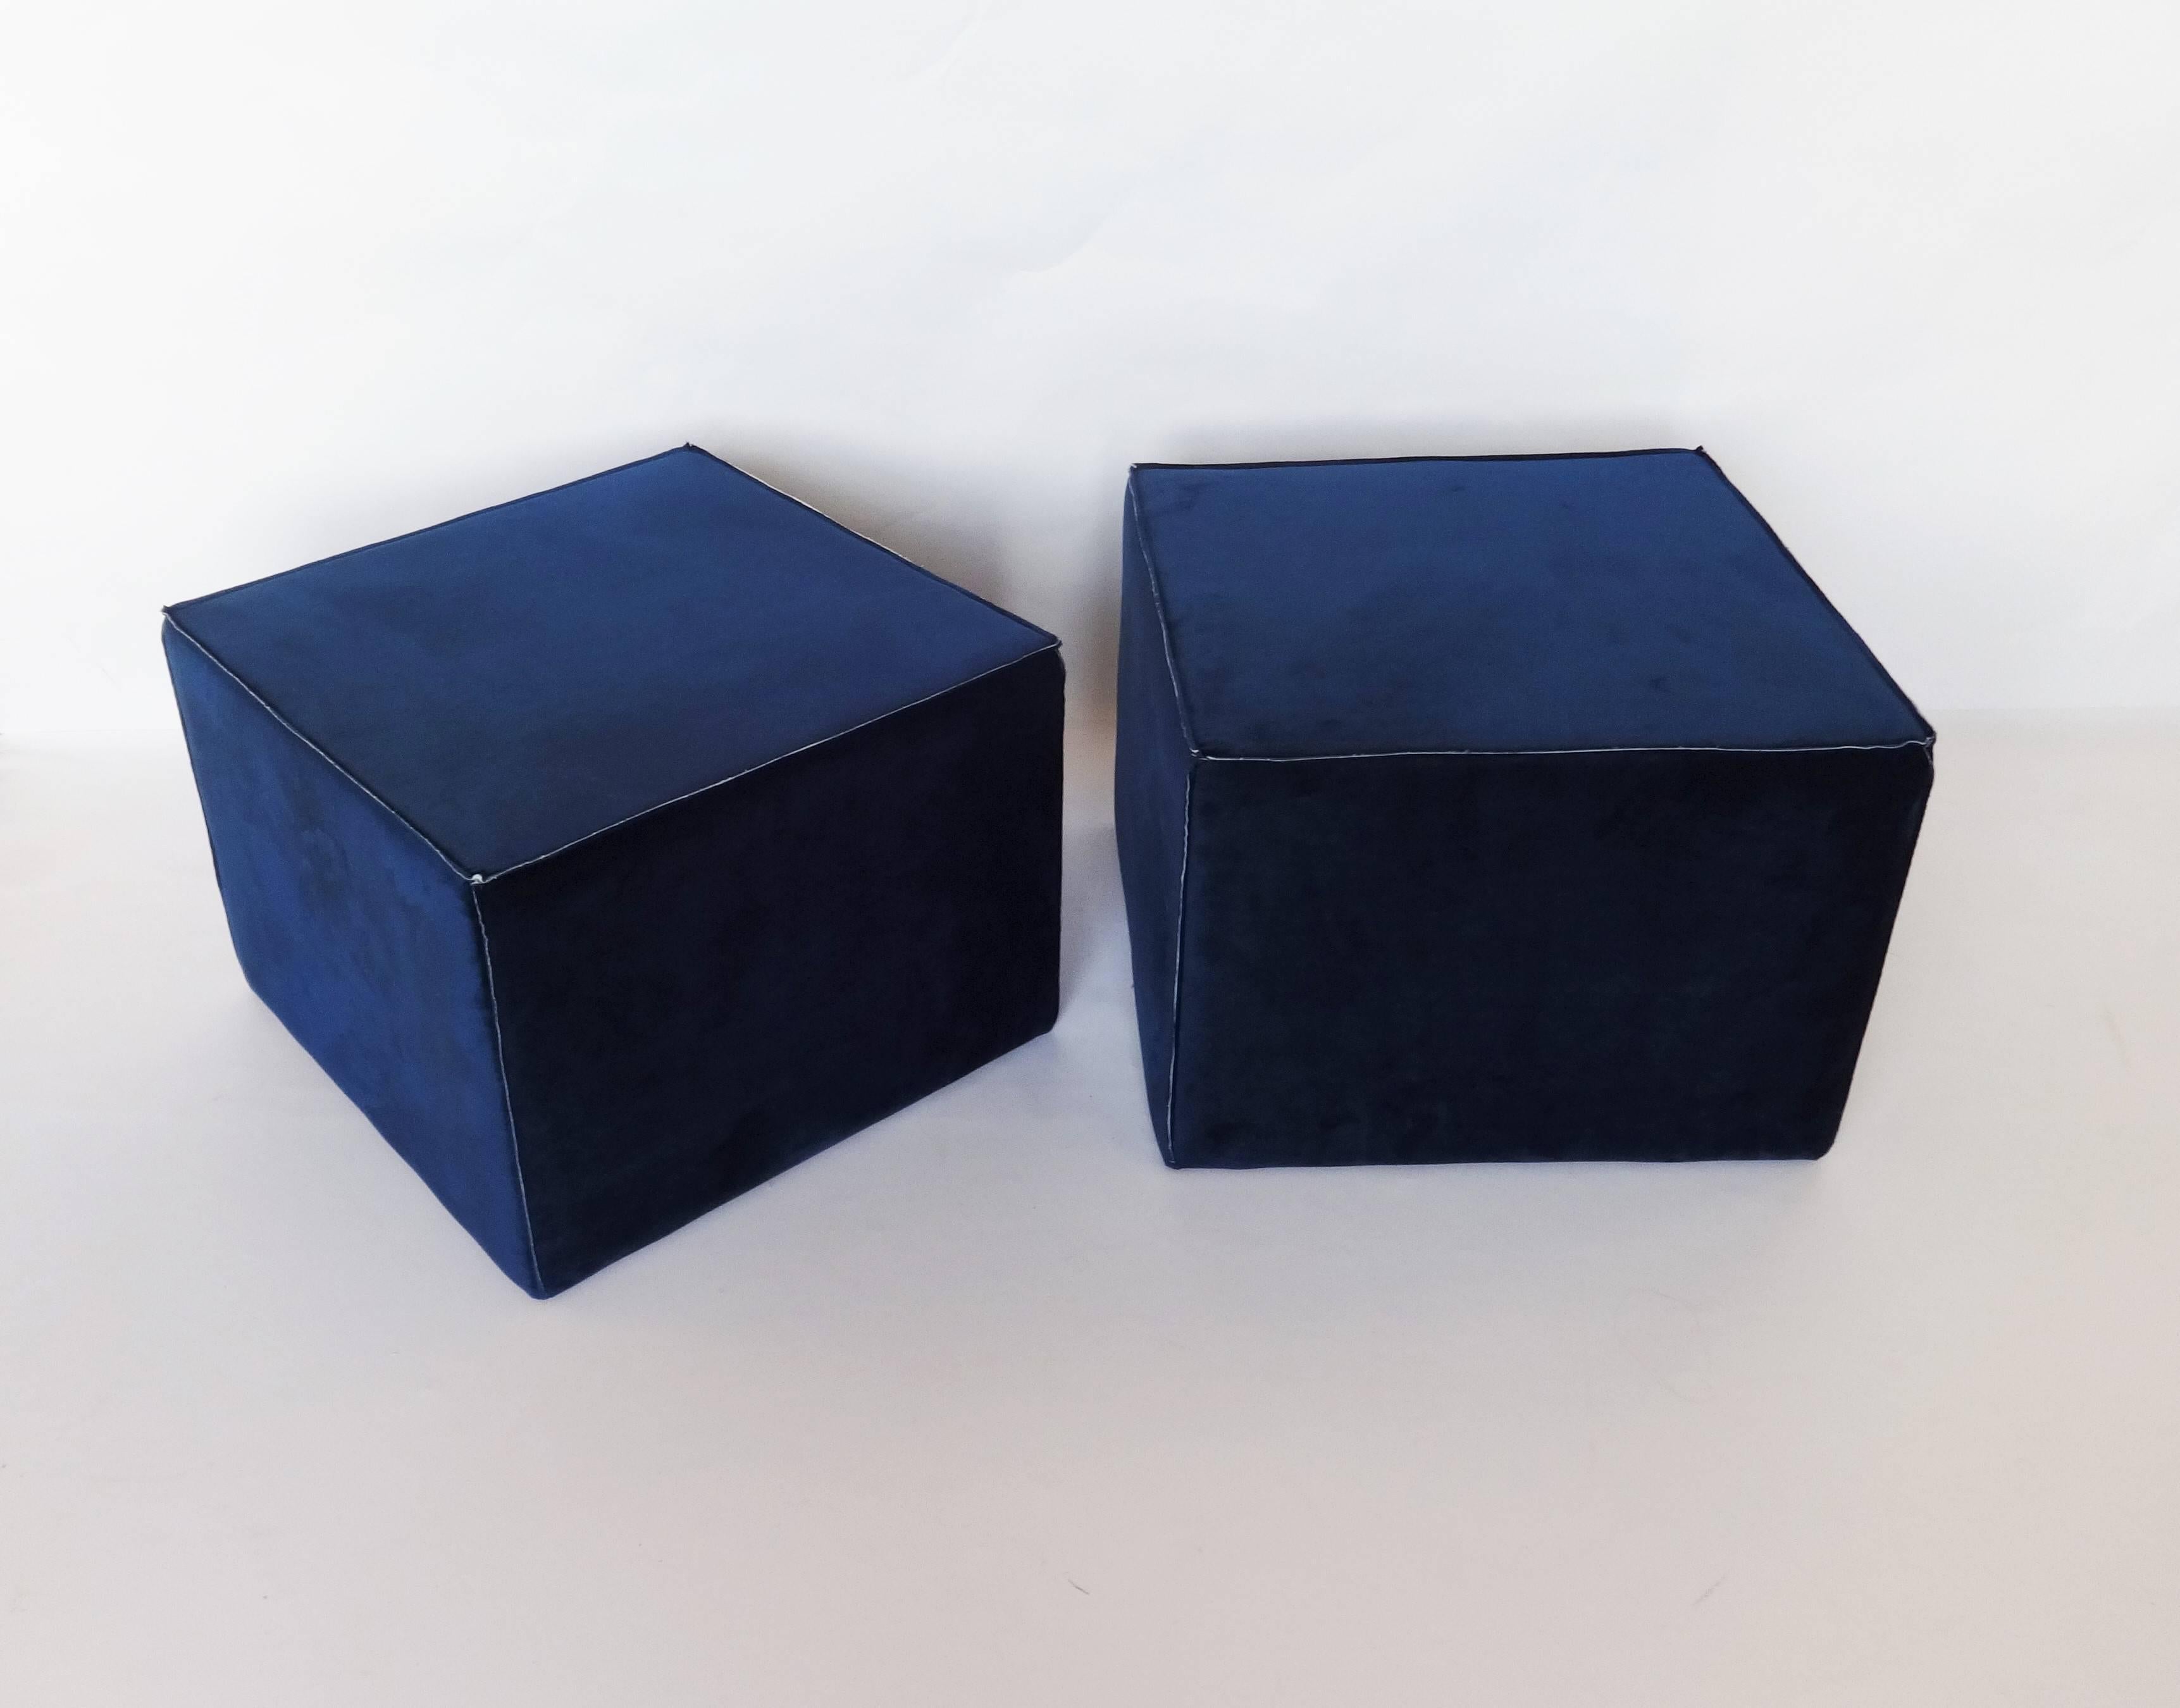 Pair of large modern upholstered ottomans. Beautiful edge detail. Navy colored velvet upholstery. Together, they provide super flexible seating, and double as a coffee table. New fabric and upholstery materials.